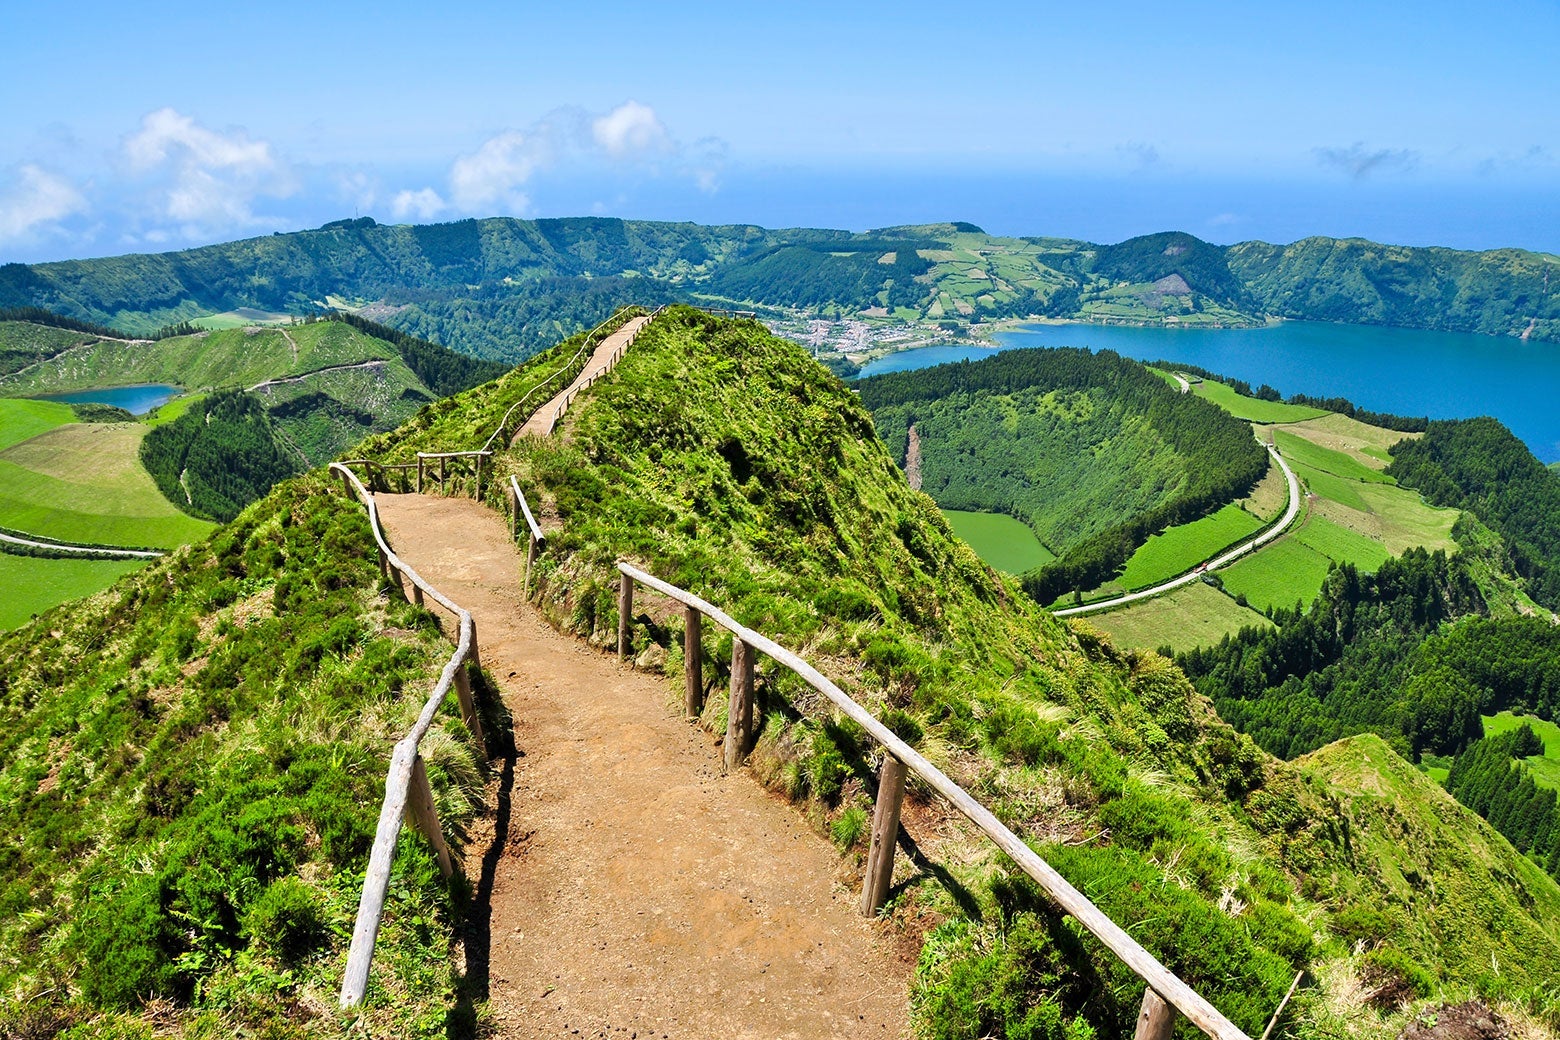 Landscape shot of a path through the hills of the Azores with lush greenery and clear blue skies.